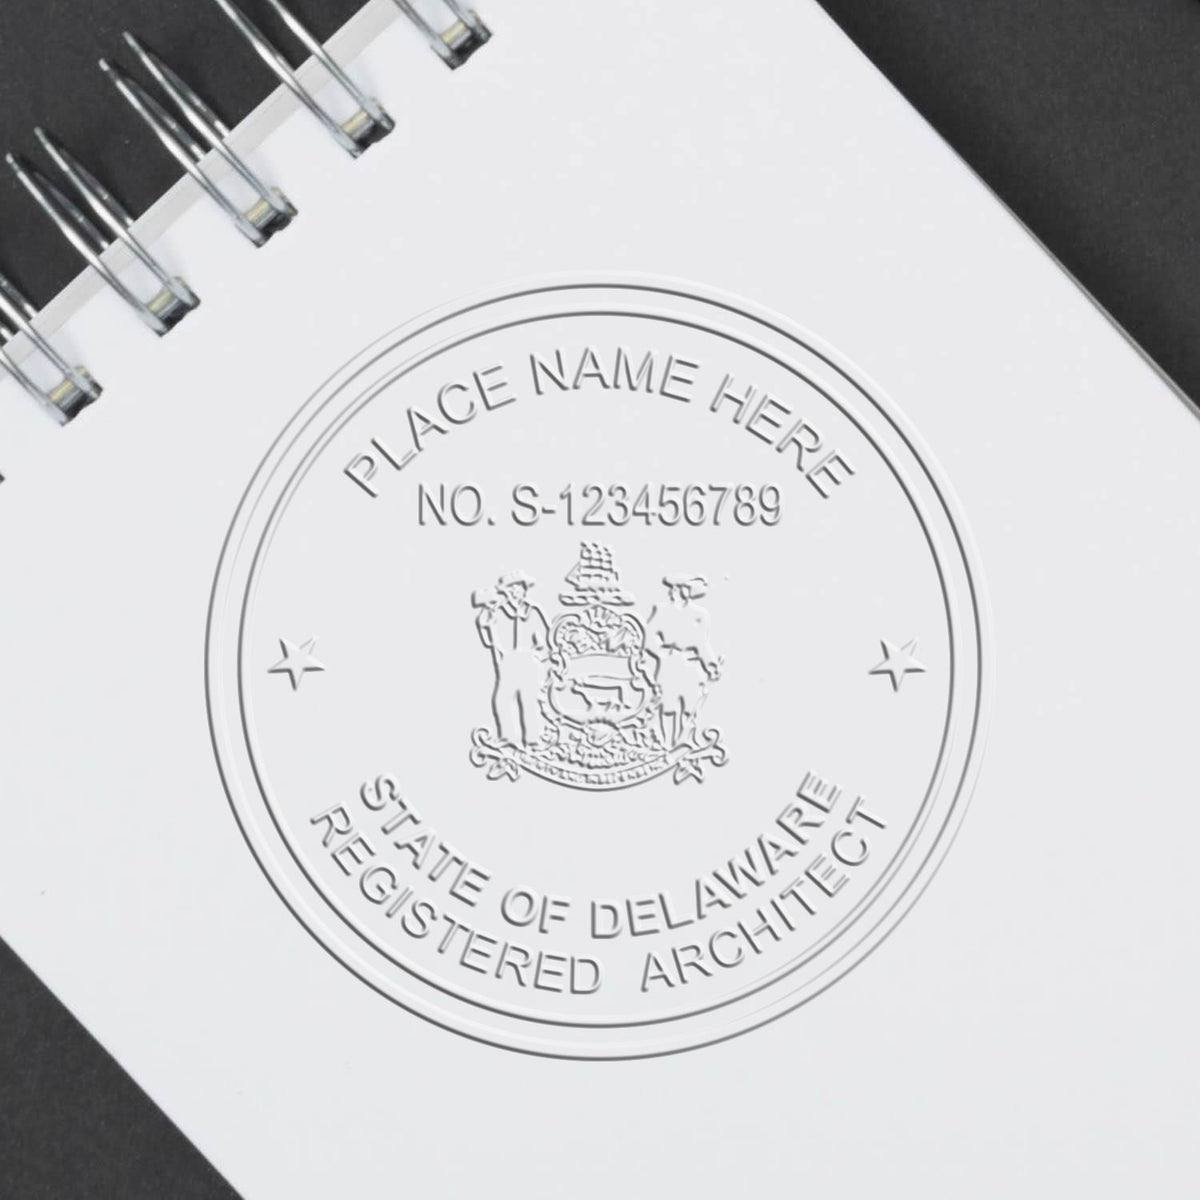 The Gift Delaware Architect Seal stamp impression comes to life with a crisp, detailed image stamped on paper - showcasing true professional quality.